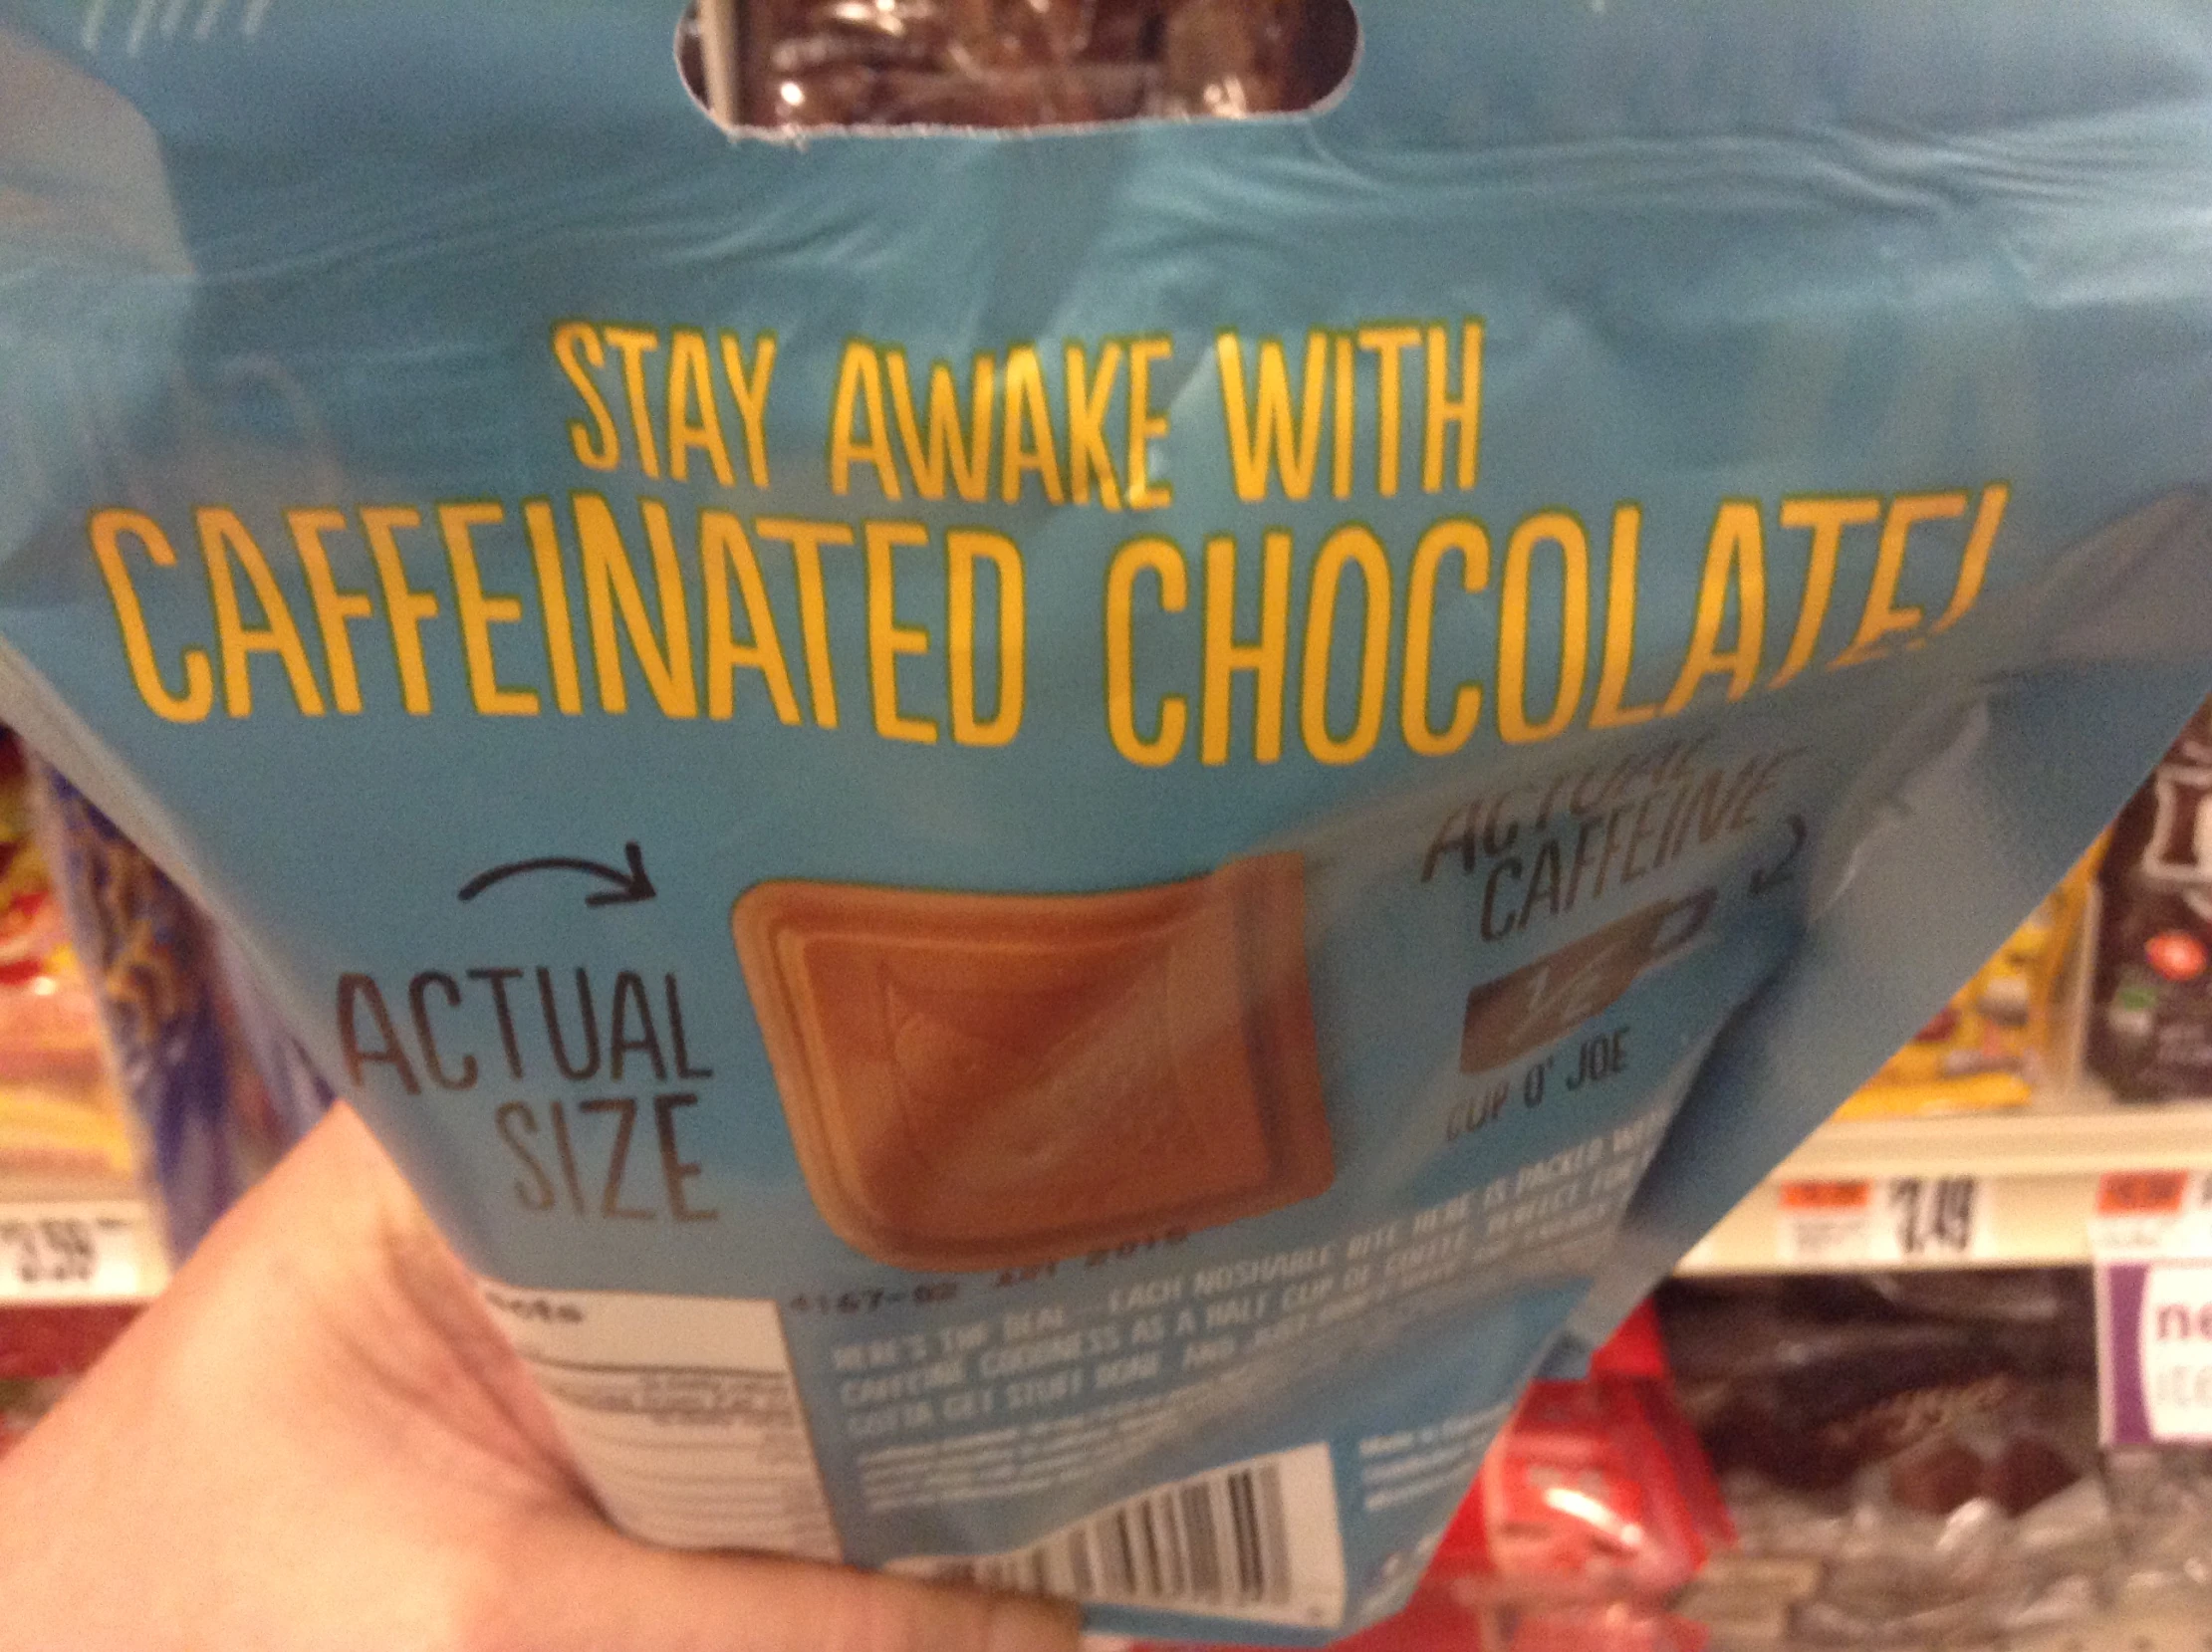 a bag of chocolate is held up in the store